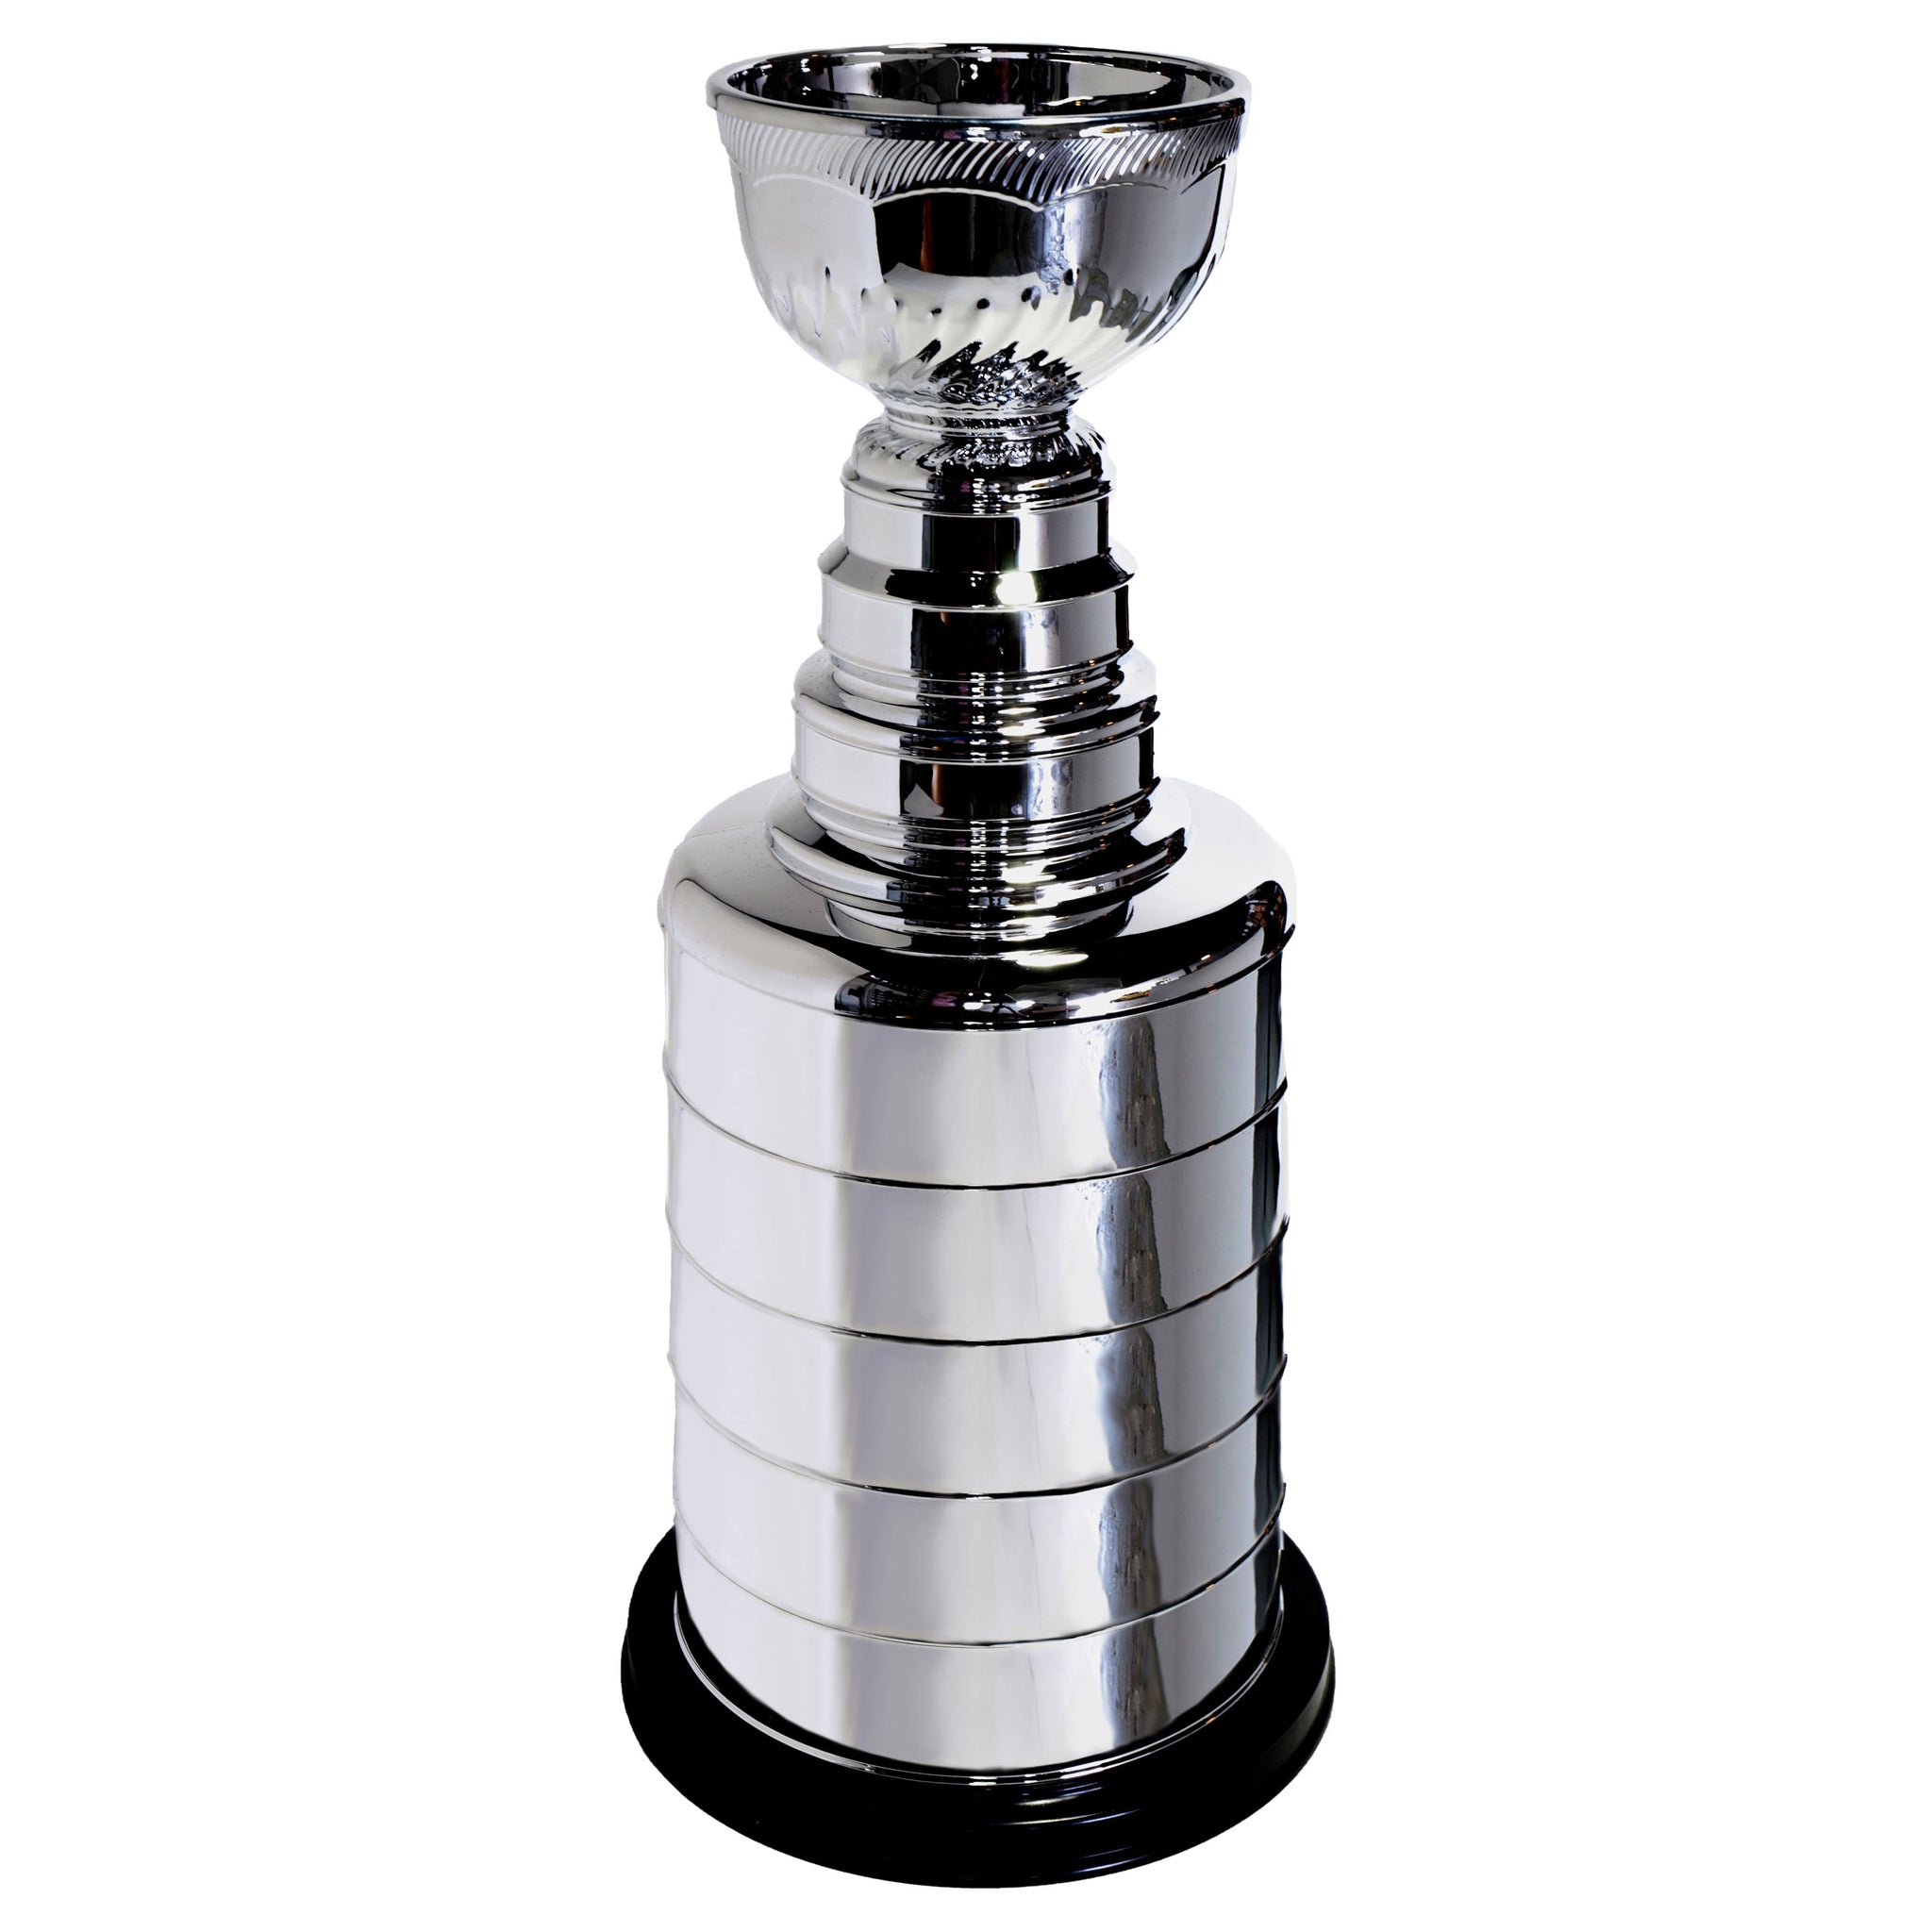 Stanley Cup Replica!!! Full Size and Weight!